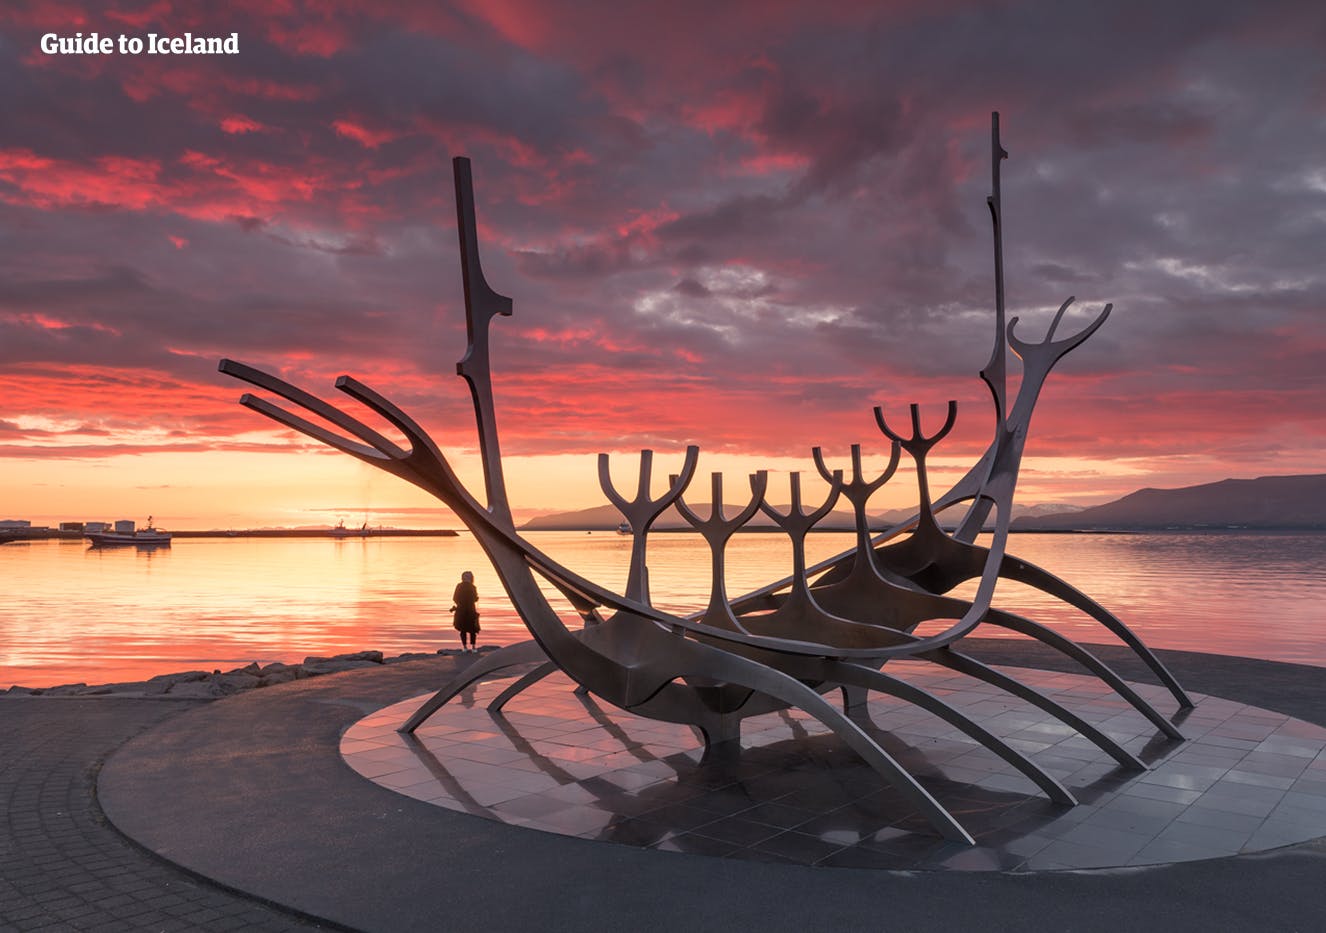 The Sun Voyager in Reykjavík is said to represent Iceland's adventurous spirit.